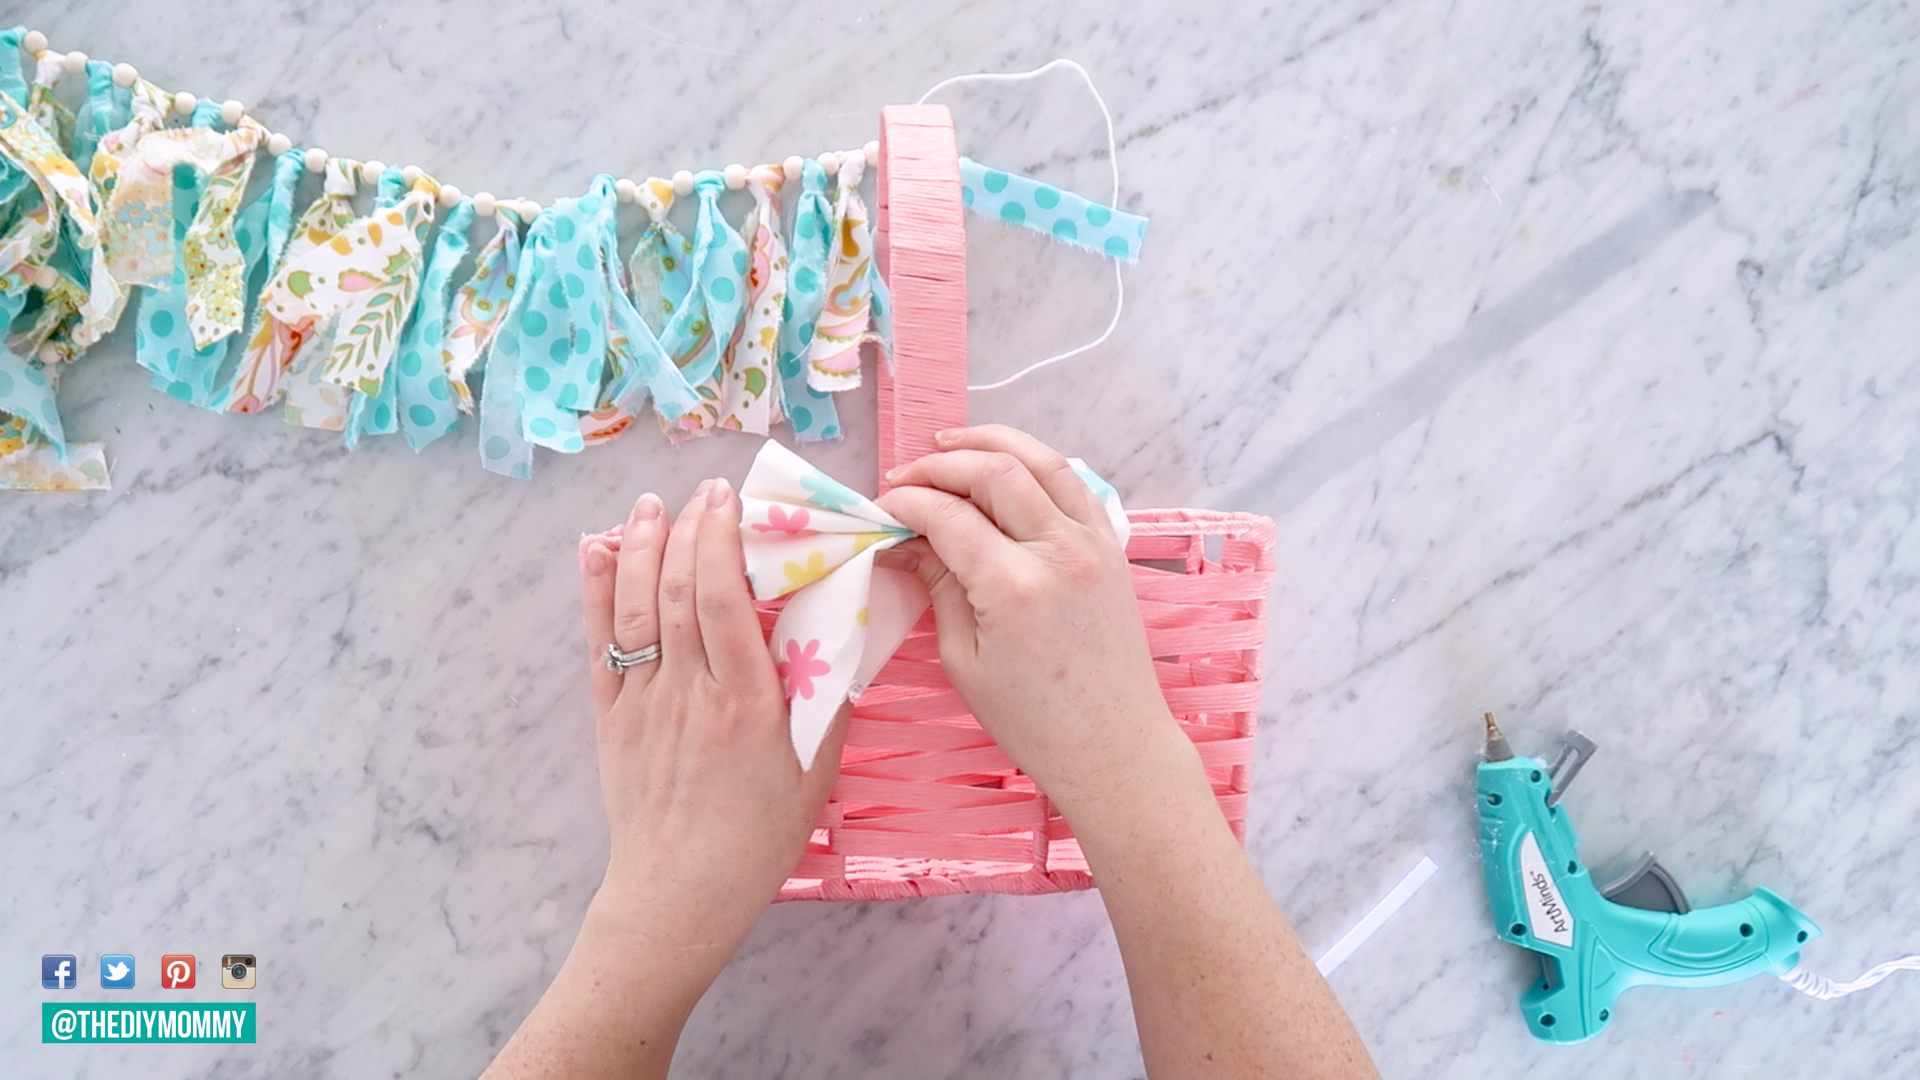 Learn how to make a DIY scrap fabric garland to decorate an Easter basket or use as wall decor